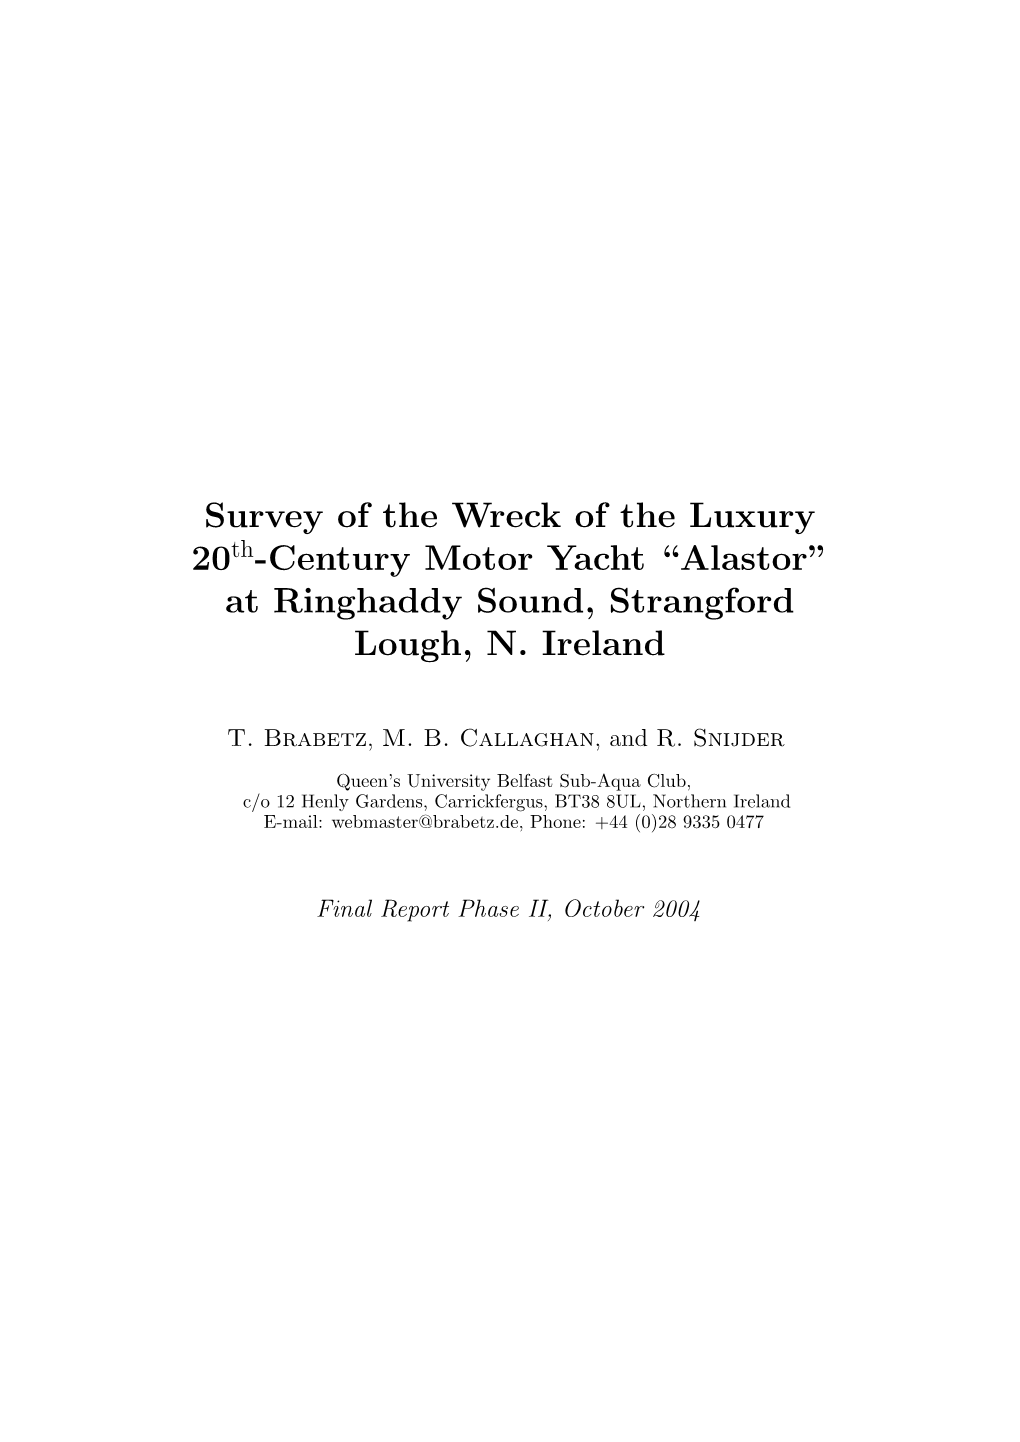 Survey of the Wreck of the Luxury 20 -Century Motor Yacht “Alastor” At